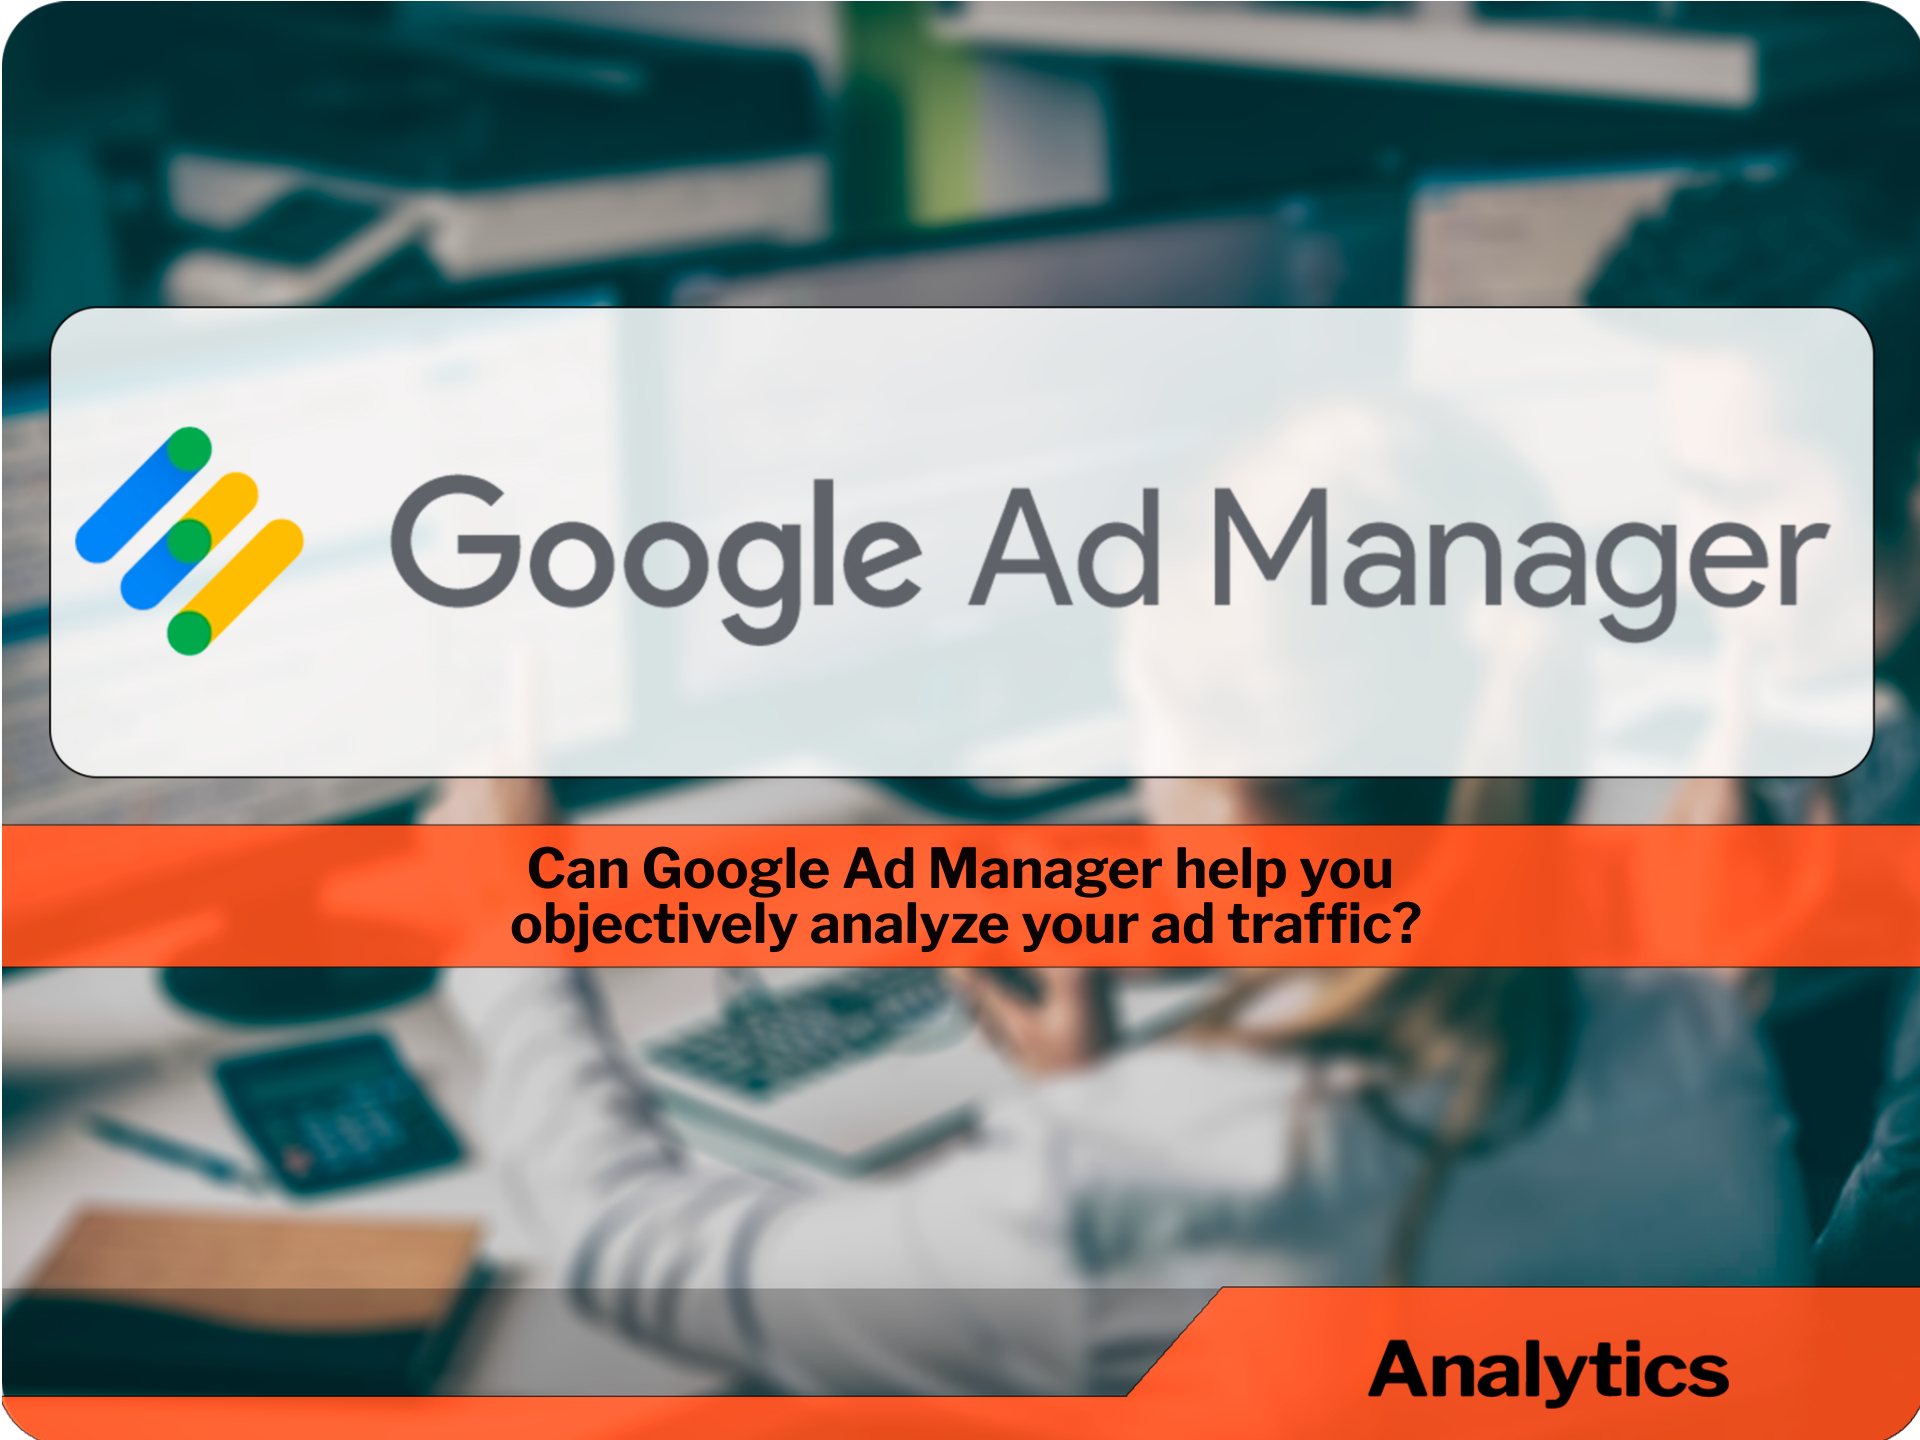 Can Google Ad Manager help you objectively analyze your ad traffic?